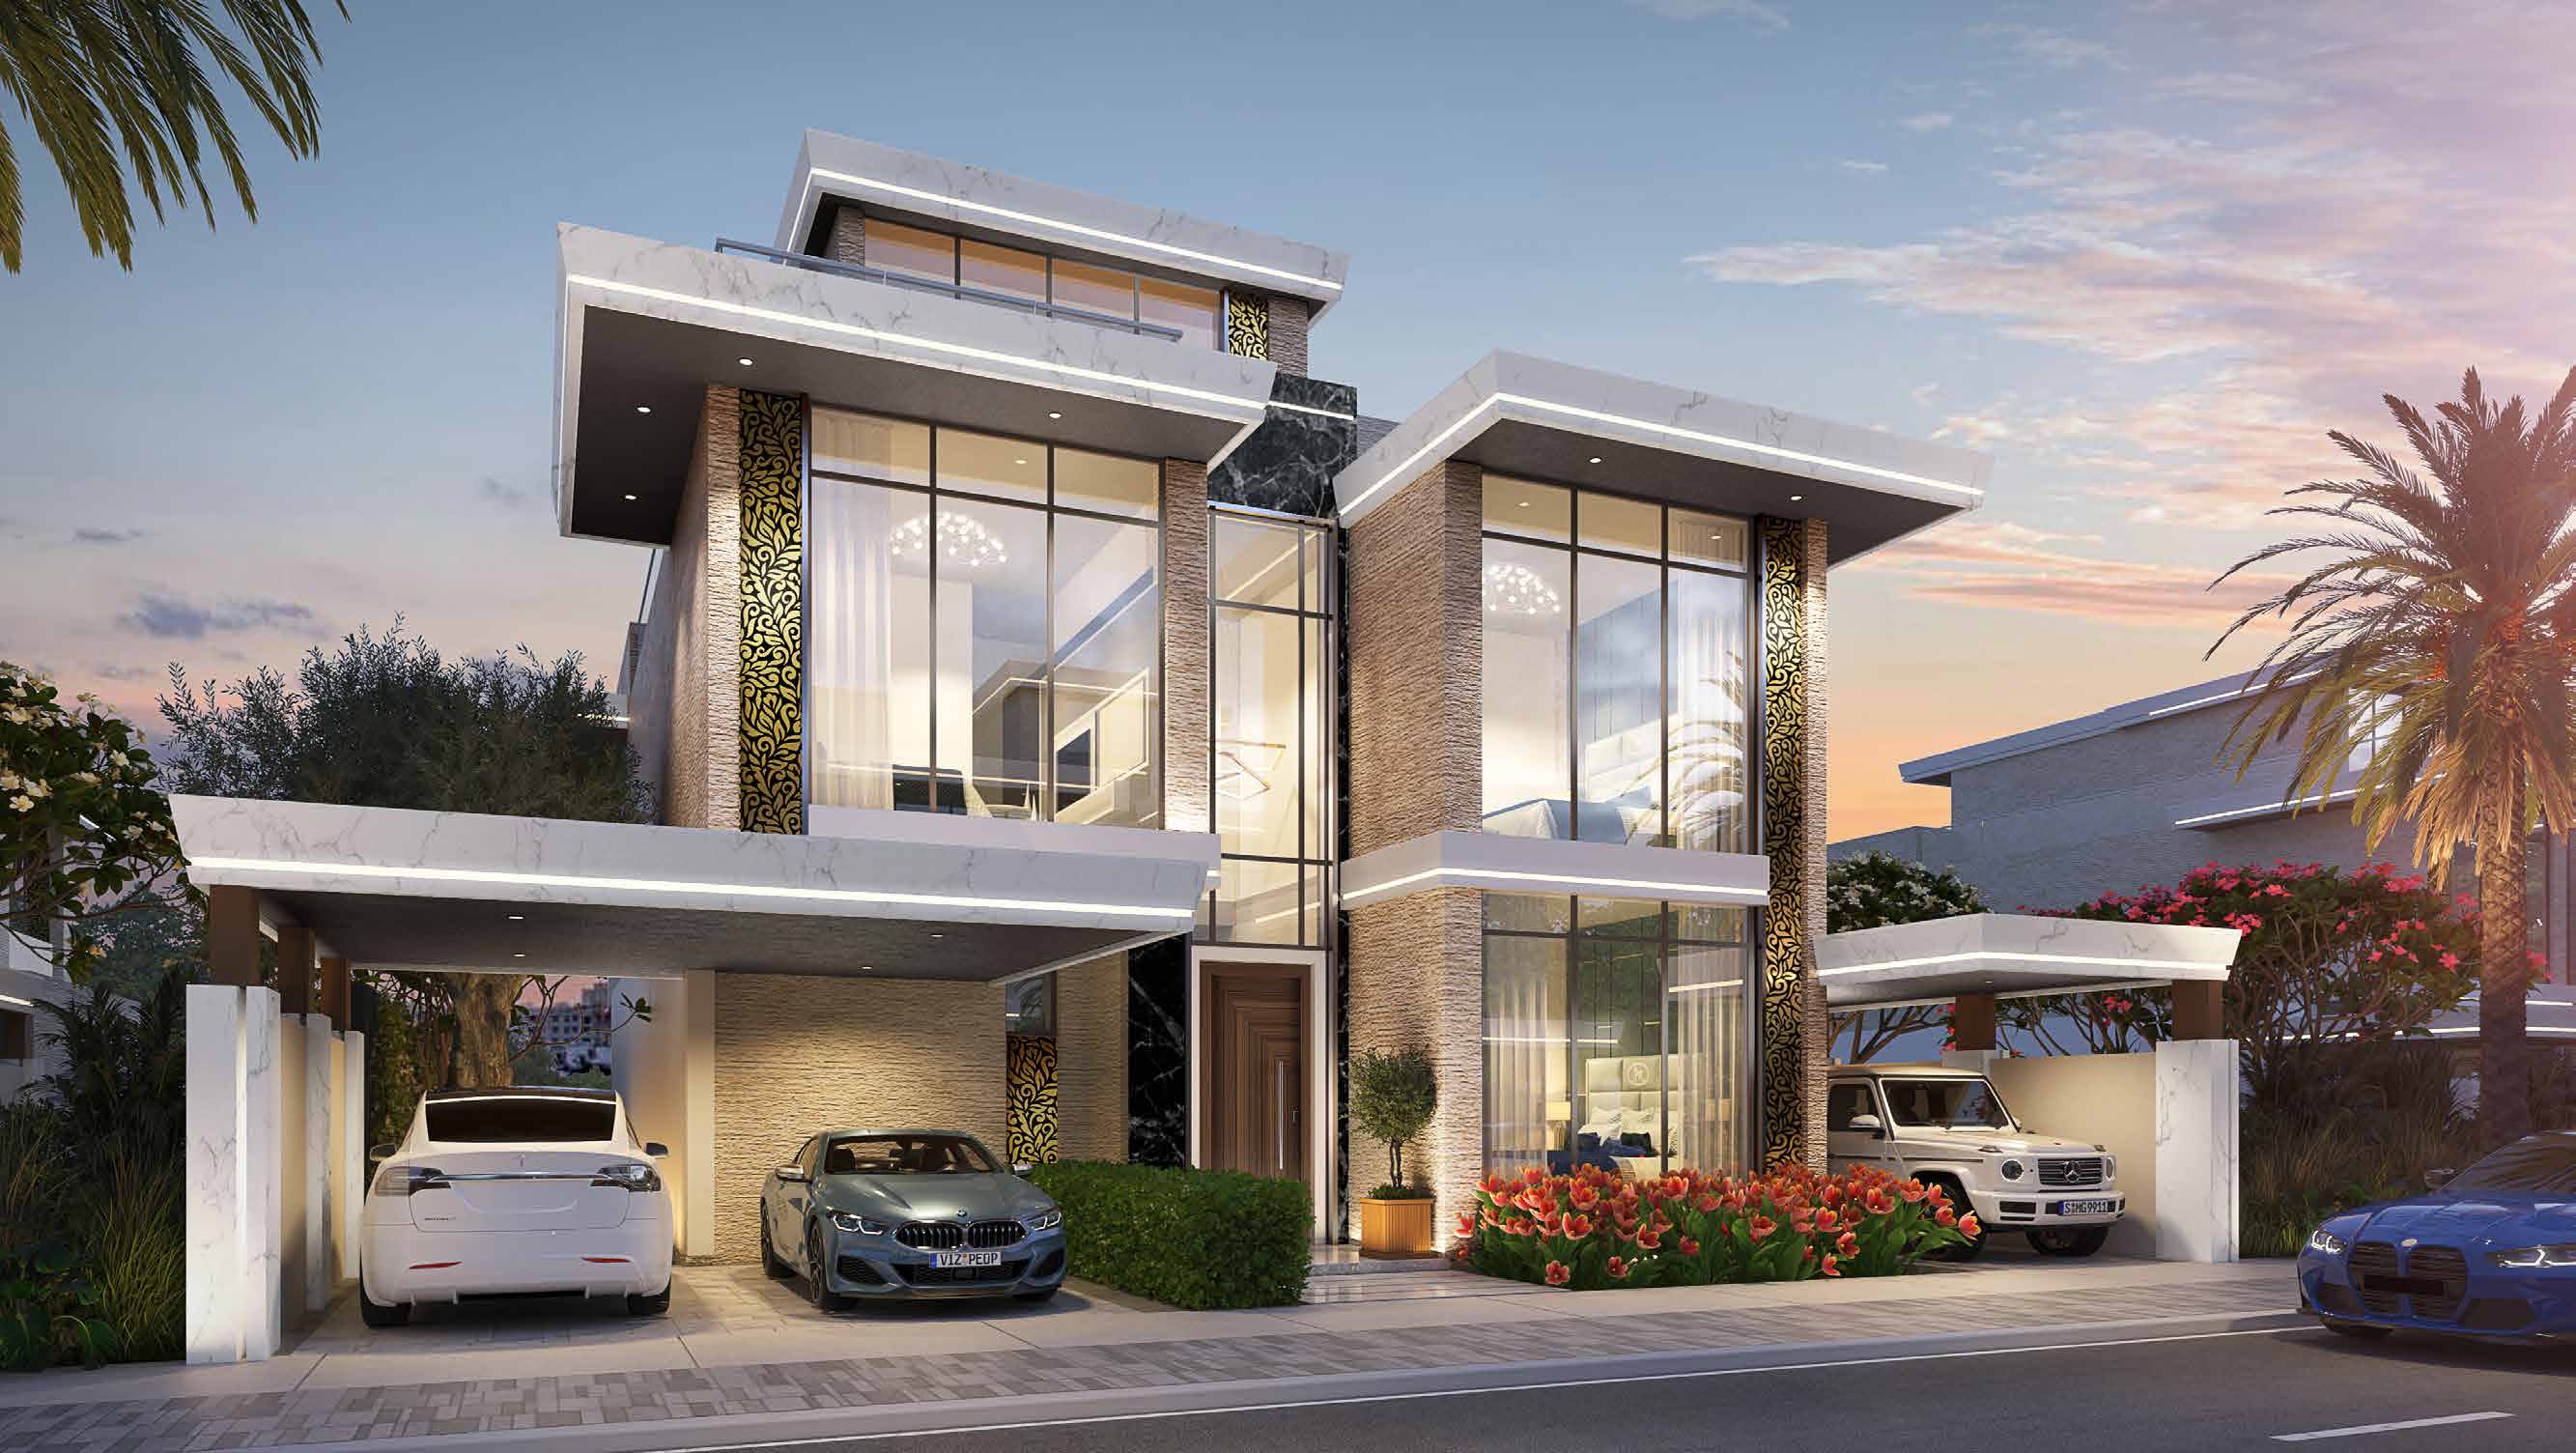 Gallery Beverly Hills Drive